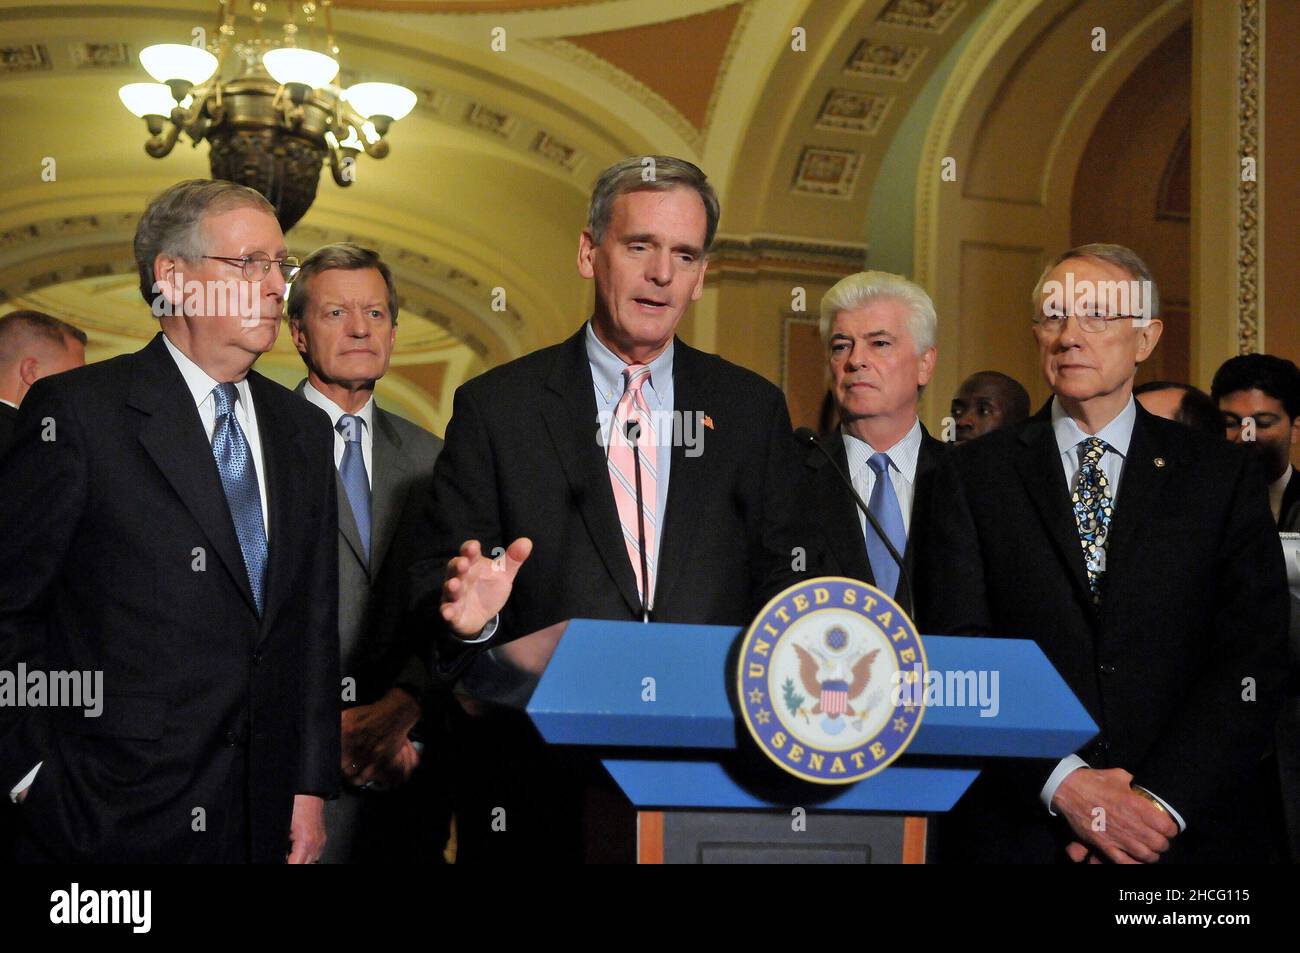 Washington, DC - October 1, 2008 -- United States Senator Judd Gregg (Republican of New Hampshire) makes a statement to reporters outside the United States Senate Chamber in the United States Capitol after casting votes to pass the 700 billion dollar Wall Street bail-out package in Washington, DC on Wednesday, October 1, 2008. From left to right: United States Senator Mitch McConnell (Republican of Kentucky), the Minority Leader; United States Senator Max Baucus (Democrat of Montana); Senator Gregg; United States Senator Chris Dodd (Democrat of Connecticut); and United States Senator Harry R Stock Photo